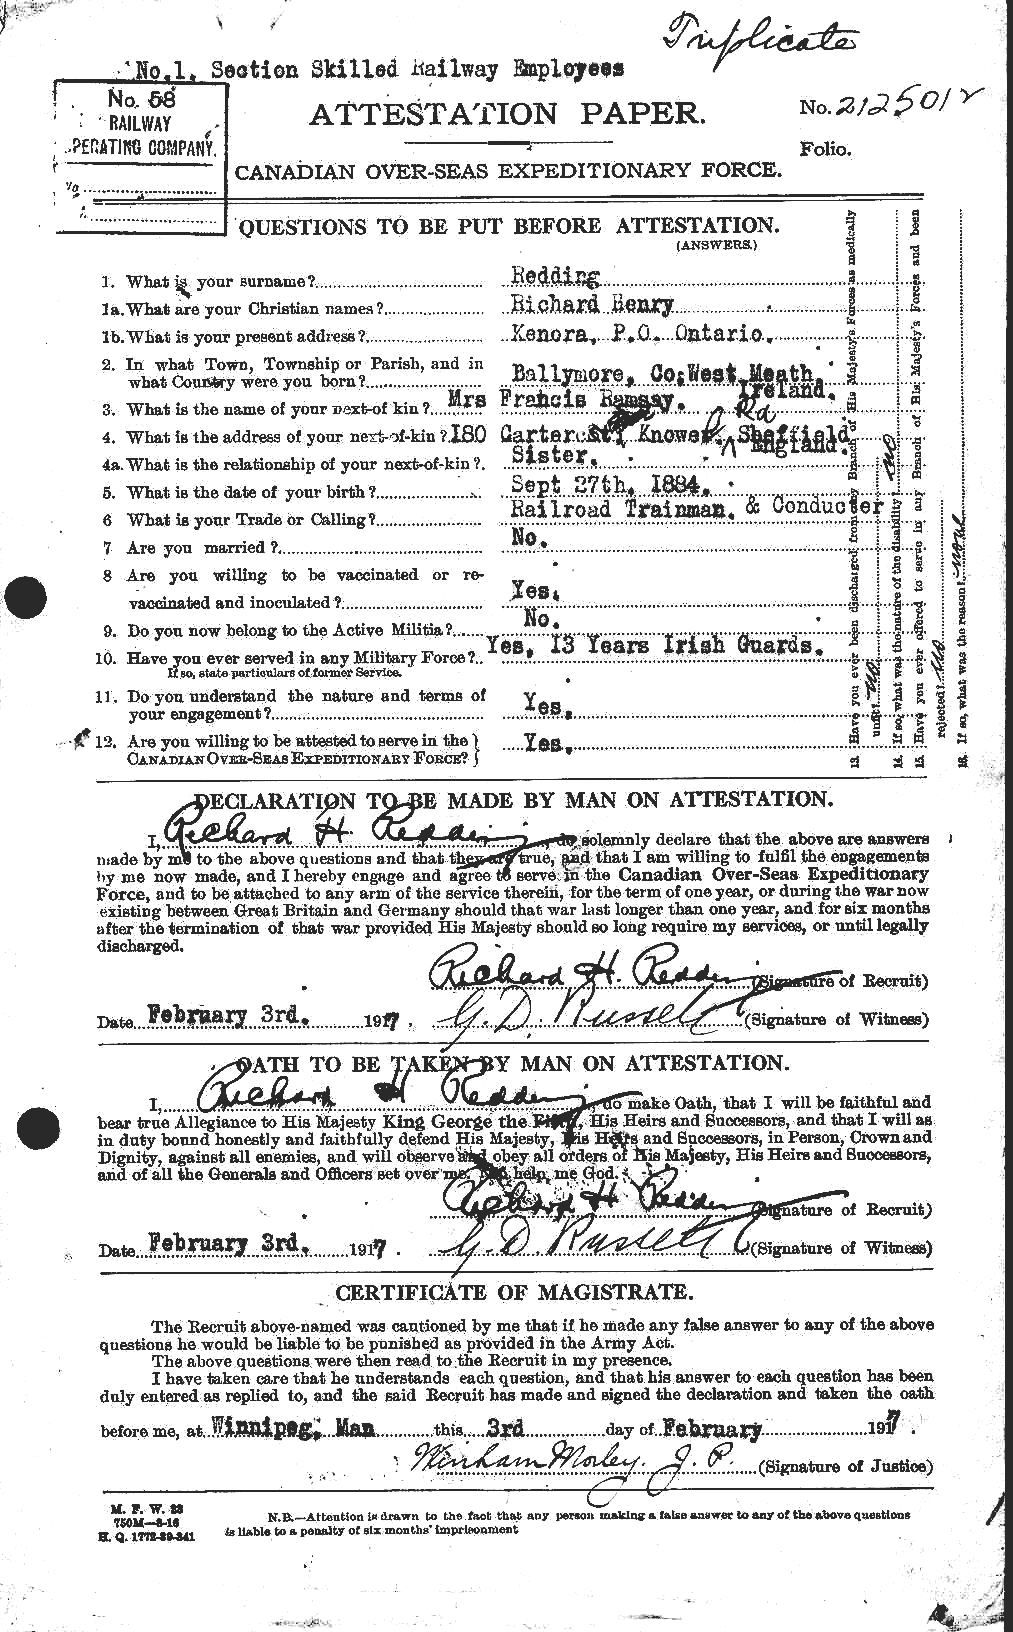 Personnel Records of the First World War - CEF 593680a